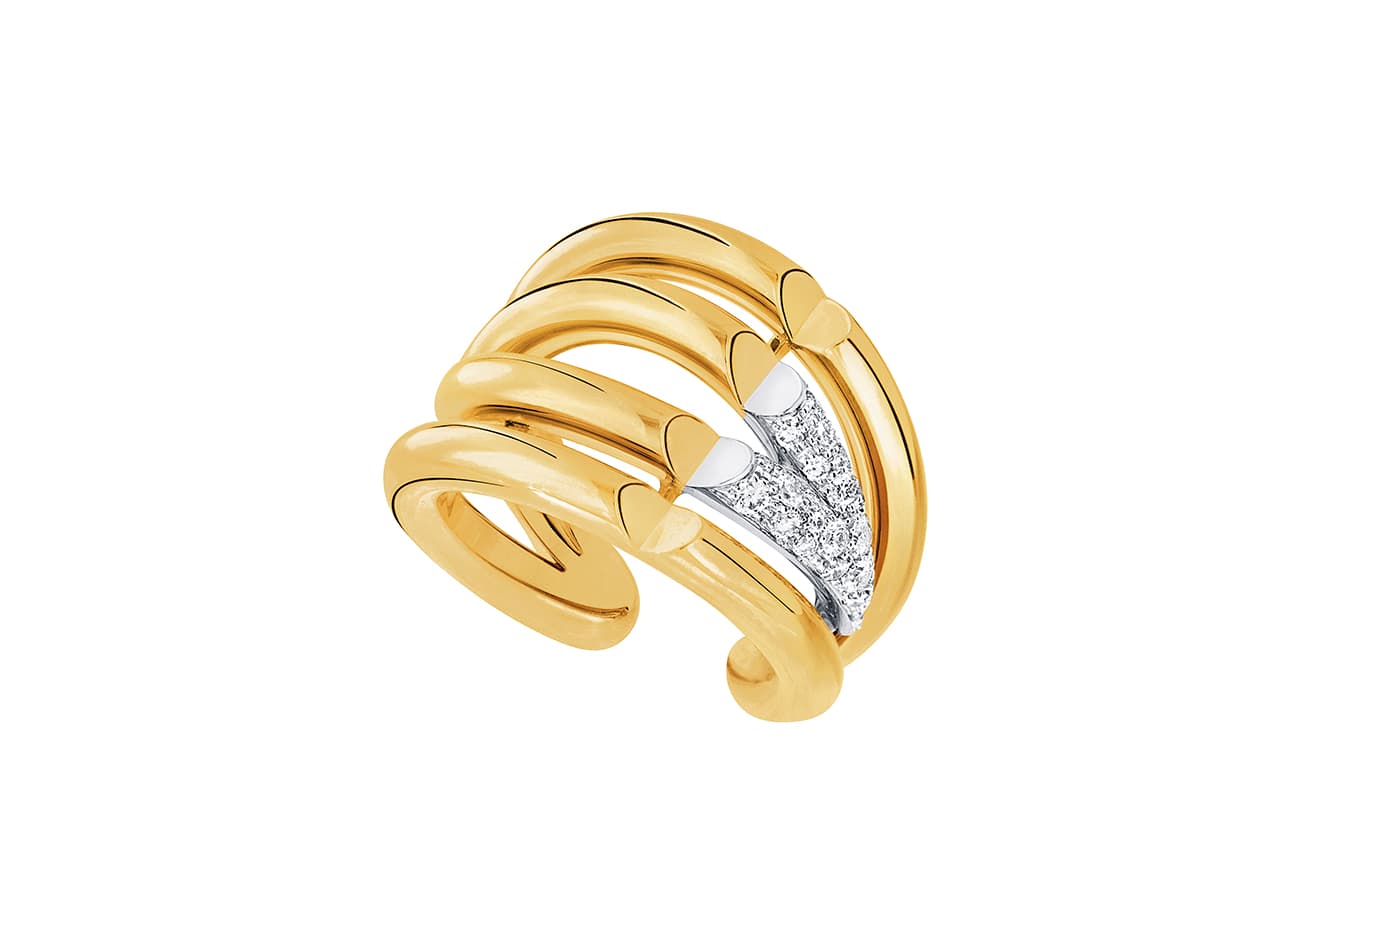 LV Volt Upside Down Ring, Yellow Gold - Jewelry - Categories